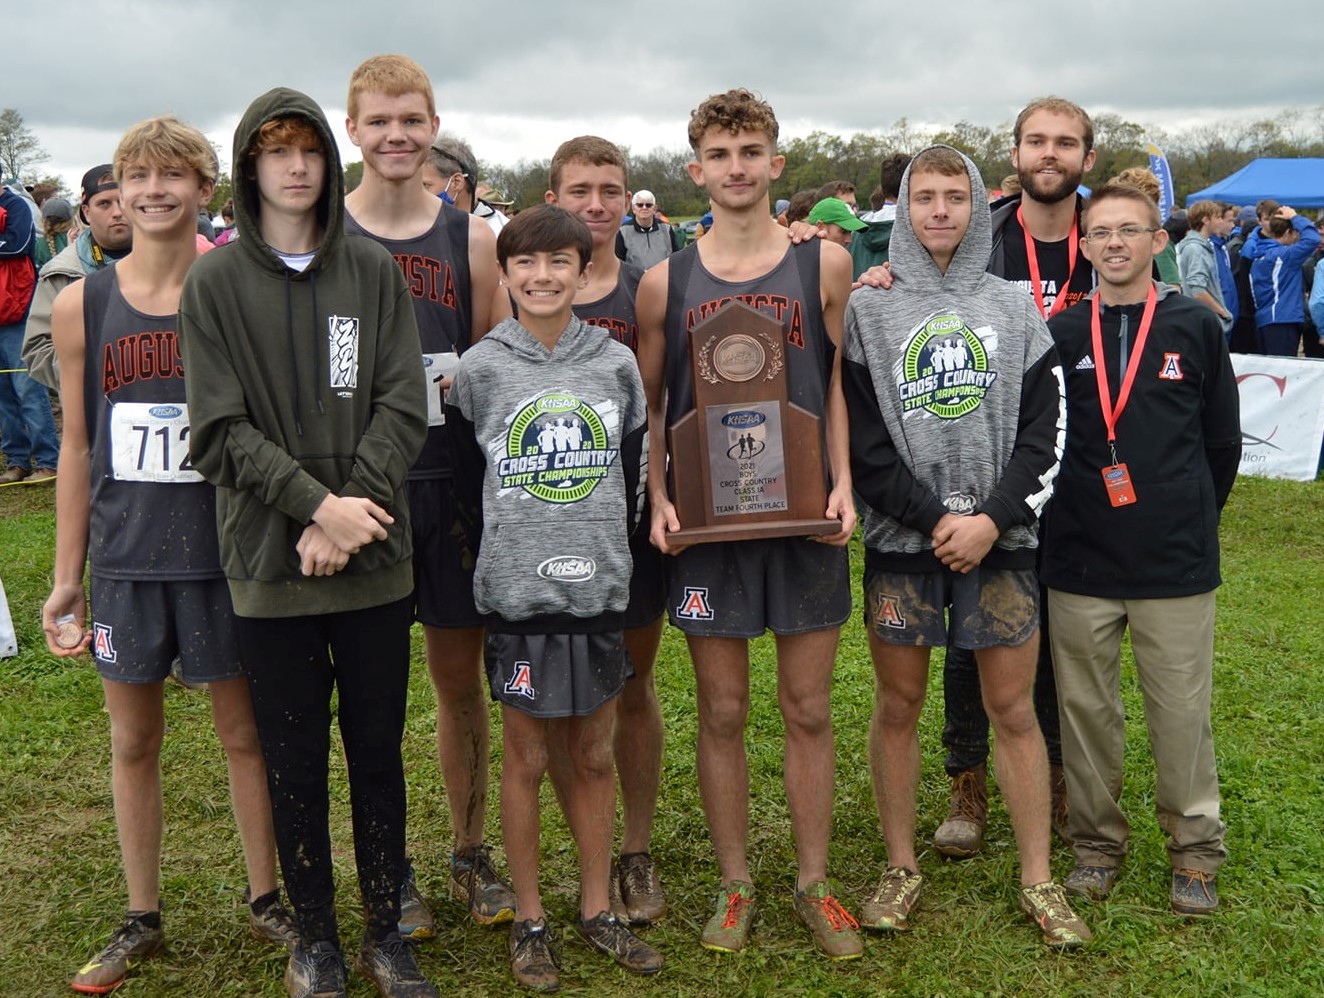 Augusta Cross Country Finishes 4th at State Championship